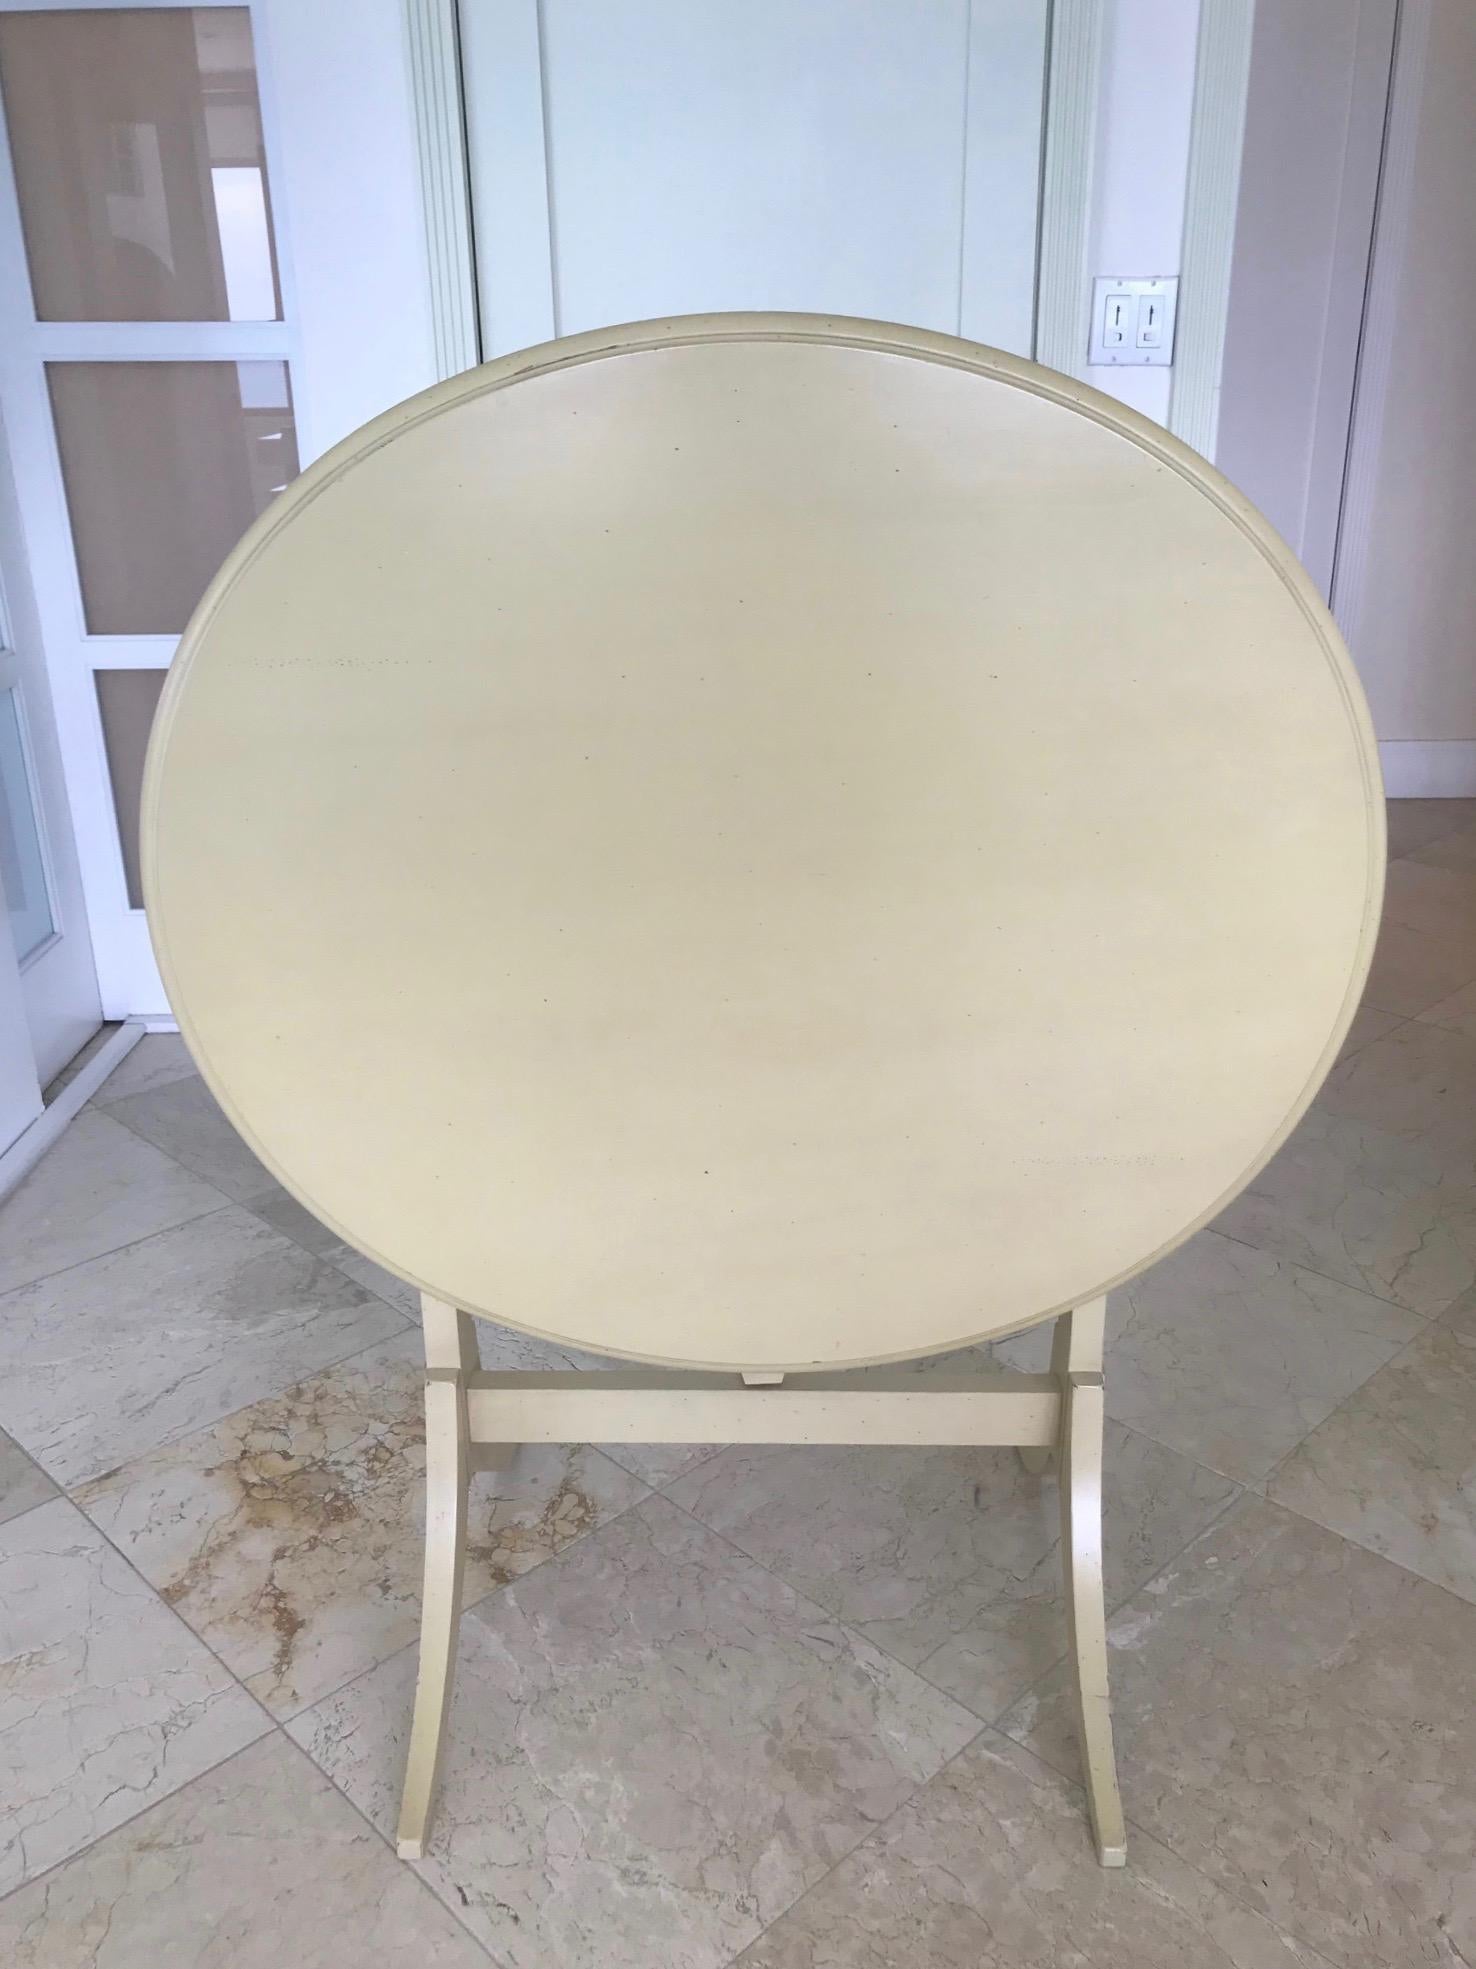 Gustavian style dessert table or library table in hand painted oakwood. Elegant hand carved designs throughout, the table features a large circular top with tilt function, for when it's not in use. The table has gorgeous splayed legs and is fitted